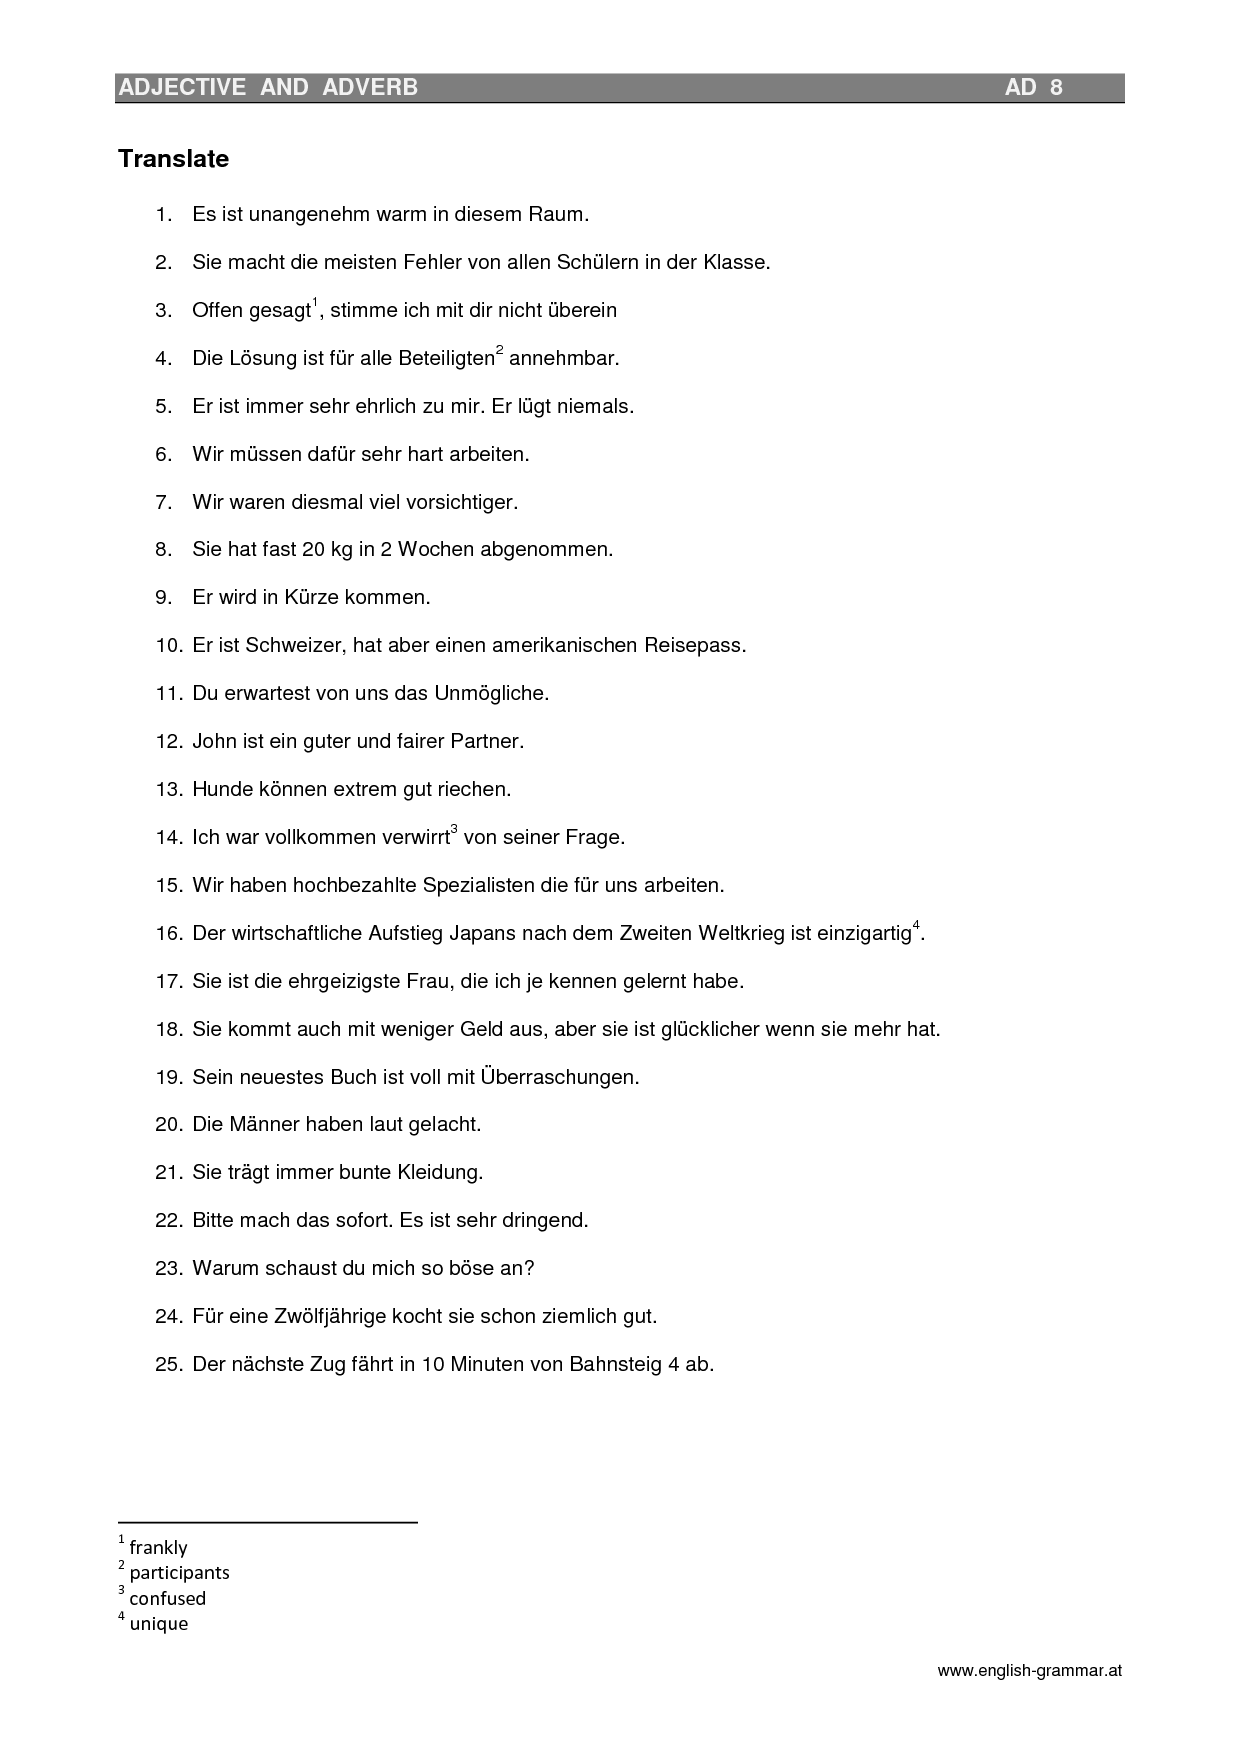 compound-subject-verb-agreement-worksheet